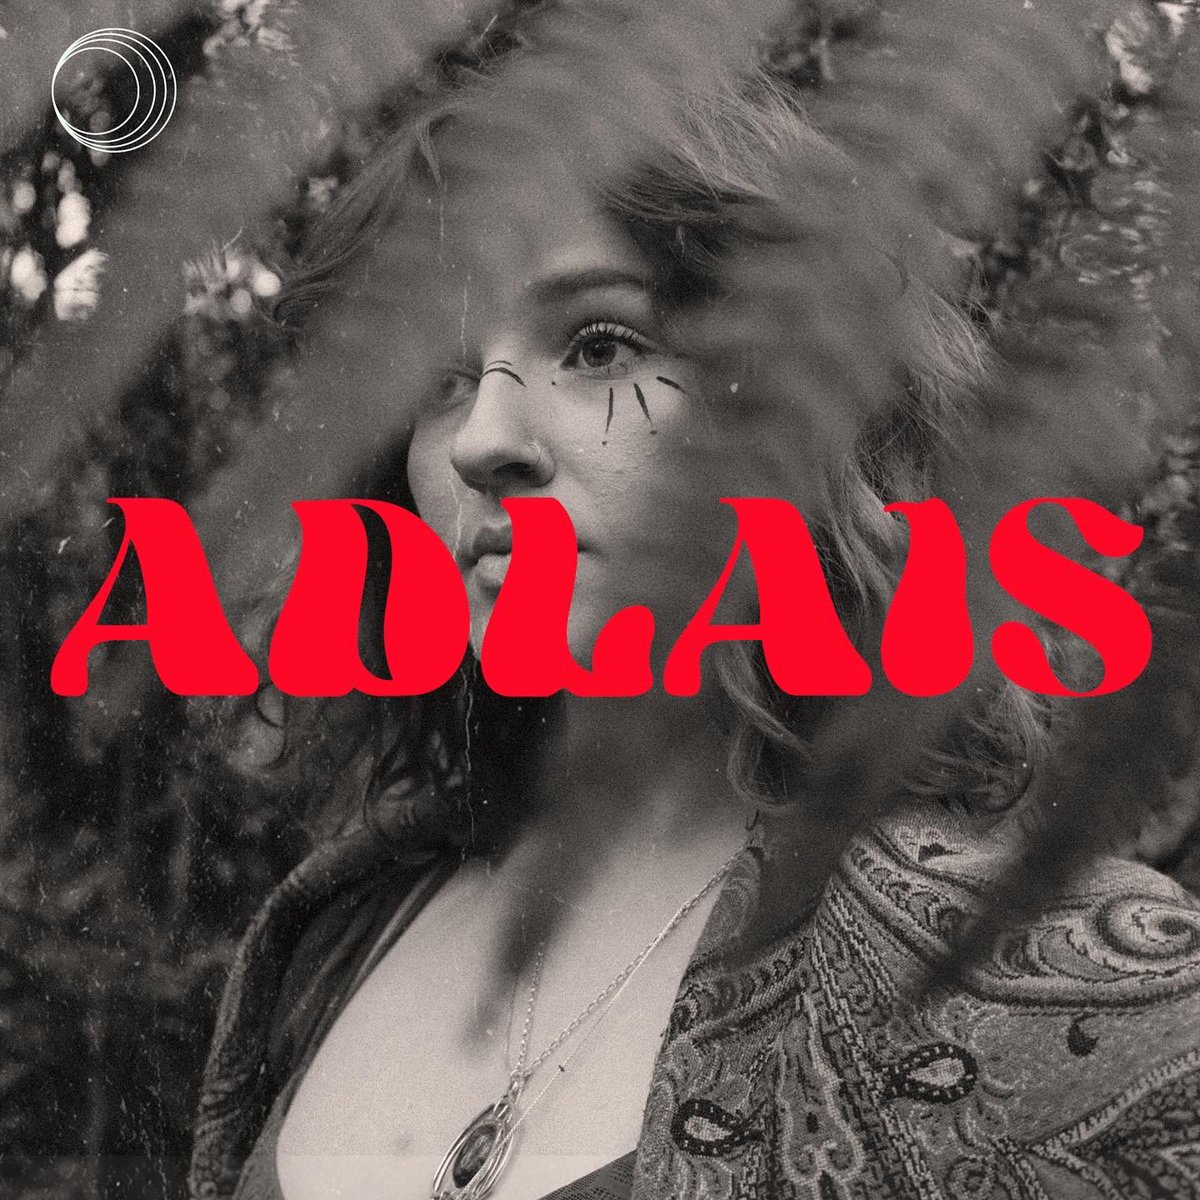 ⭕️ What an Easter treat this month 🐣 🖼️ @marimathiasmusic_ Returns with a gorgeous folk single - Pan O’Wyn y Gwanwyn Listen to some of the most exciting Welsh artists in the updated Adlais playlist.